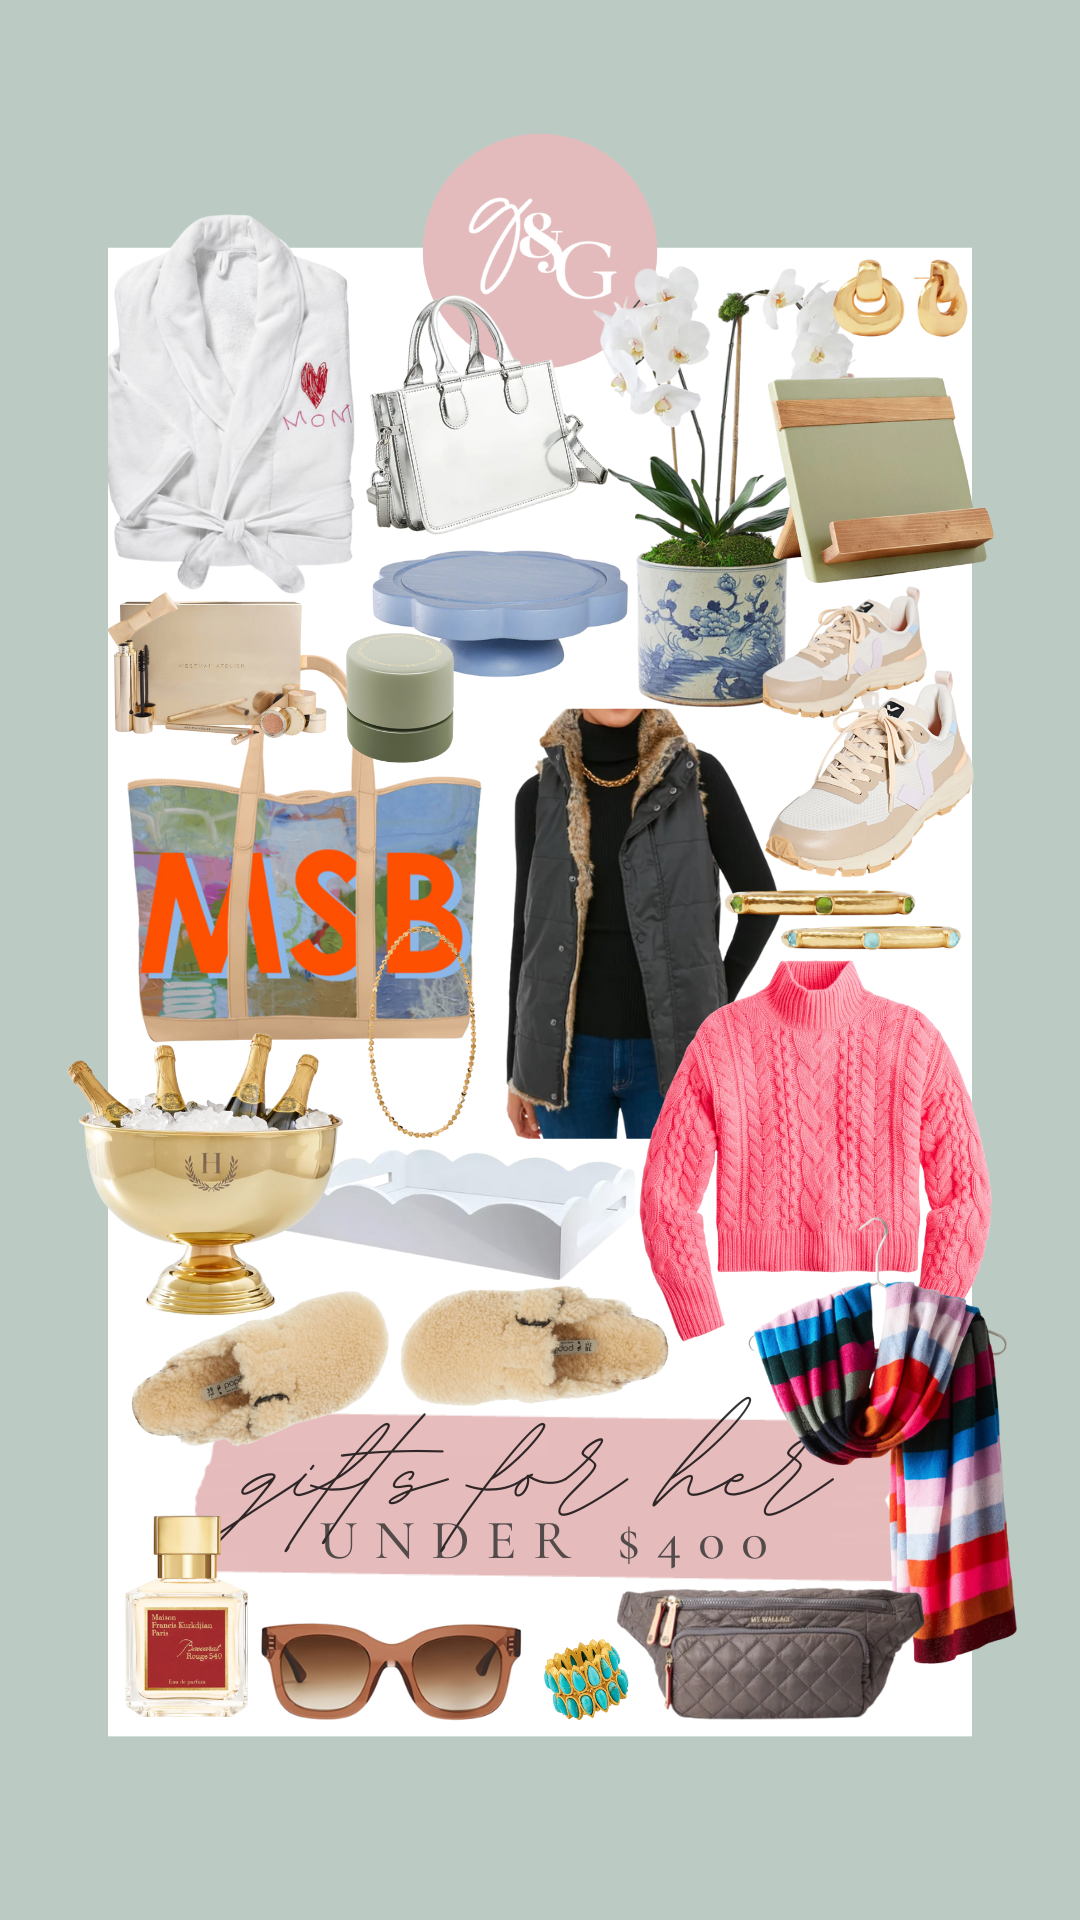 Gift Guide for Her // Gifts under $400